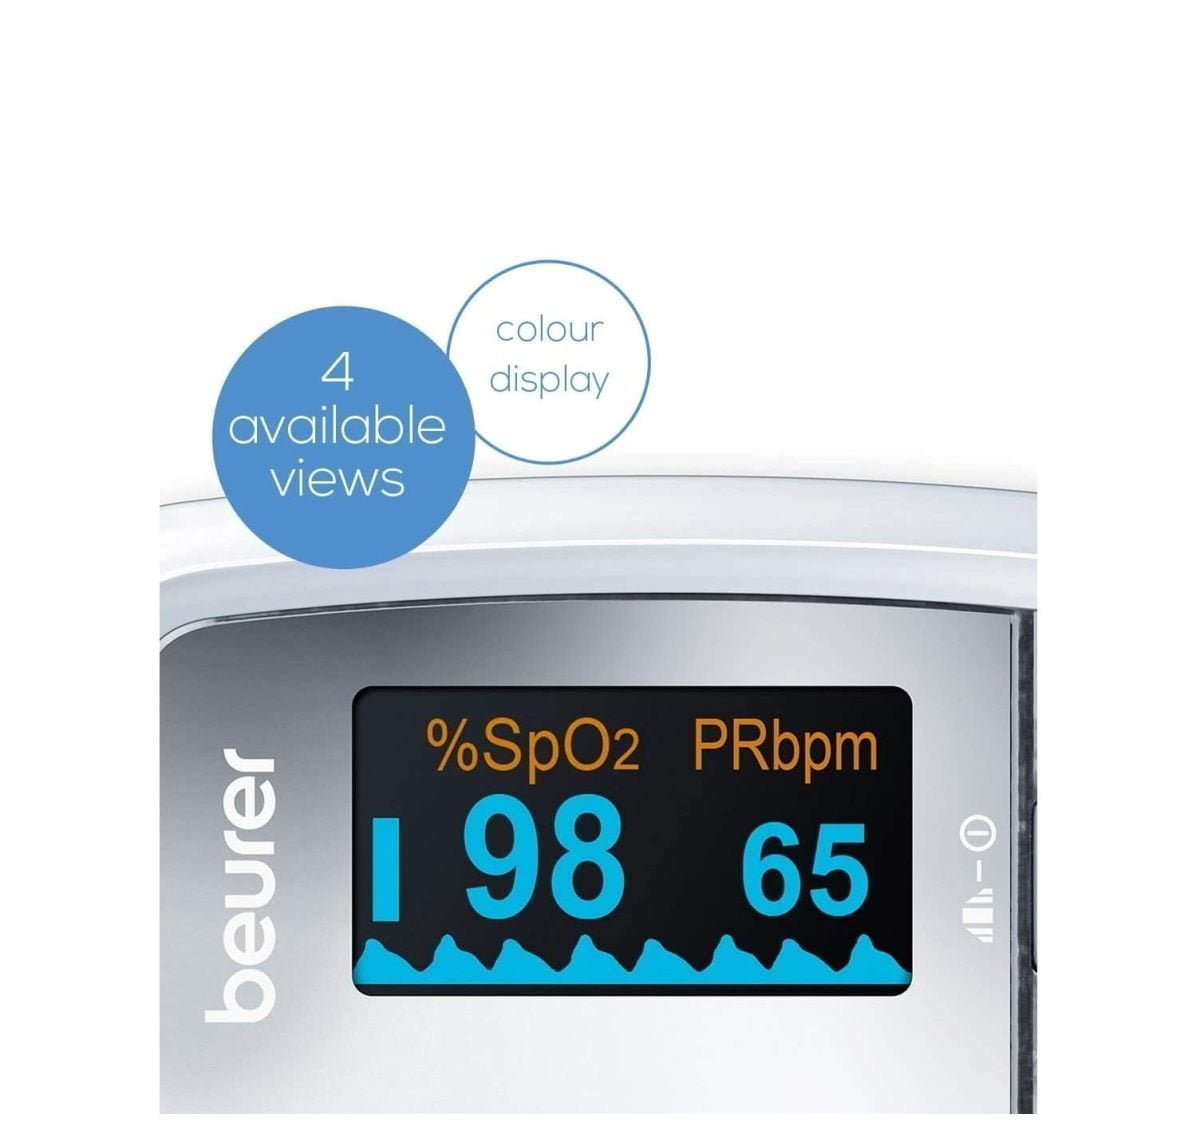 61Wujky42Bl. Ac Sl1100 &Lt;H1&Gt;Beurer Po 30 Pulse Oximeter - Silver&Lt;/H1&Gt; &Lt;Ul Class=&Quot;A-Unordered-List A-Vertical A-Spacing-Mini&Quot;&Gt; &Lt;Li&Gt;&Lt;Span Class=&Quot;A-List-Item&Quot;&Gt; Measurement Of Arterial Oxygen Saturation (Spo2) And Heart Rate (Pulse) &Lt;/Span&Gt;&Lt;/Li&Gt; &Lt;Li&Gt;&Lt;Span Class=&Quot;A-List-Item&Quot;&Gt; Particularly Suitable For Persons With: Heart Failure, Chronic Obstructive Pulmonary Diseases, Bronchial Asthma &Lt;/Span&Gt;&Lt;/Li&Gt; &Lt;Li&Gt;&Lt;Span Class=&Quot;A-List-Item&Quot;&Gt; Also Suitable For Sports At High Altitudes &Lt;/Span&Gt;&Lt;/Li&Gt; &Lt;Li&Gt;&Lt;Span Class=&Quot;A-List-Item&Quot;&Gt; Colour Display With 4 Available Views &Lt;/Span&Gt;&Lt;/Li&Gt; &Lt;Li&Gt;&Lt;Span Class=&Quot;A-List-Item&Quot;&Gt; Small And Light For Use At Home And On The Move &Lt;/Span&Gt;&Lt;/Li&Gt; &Lt;/Ul&Gt; Oximeter Beurer Po 30 Pulse Oximeter - Silver